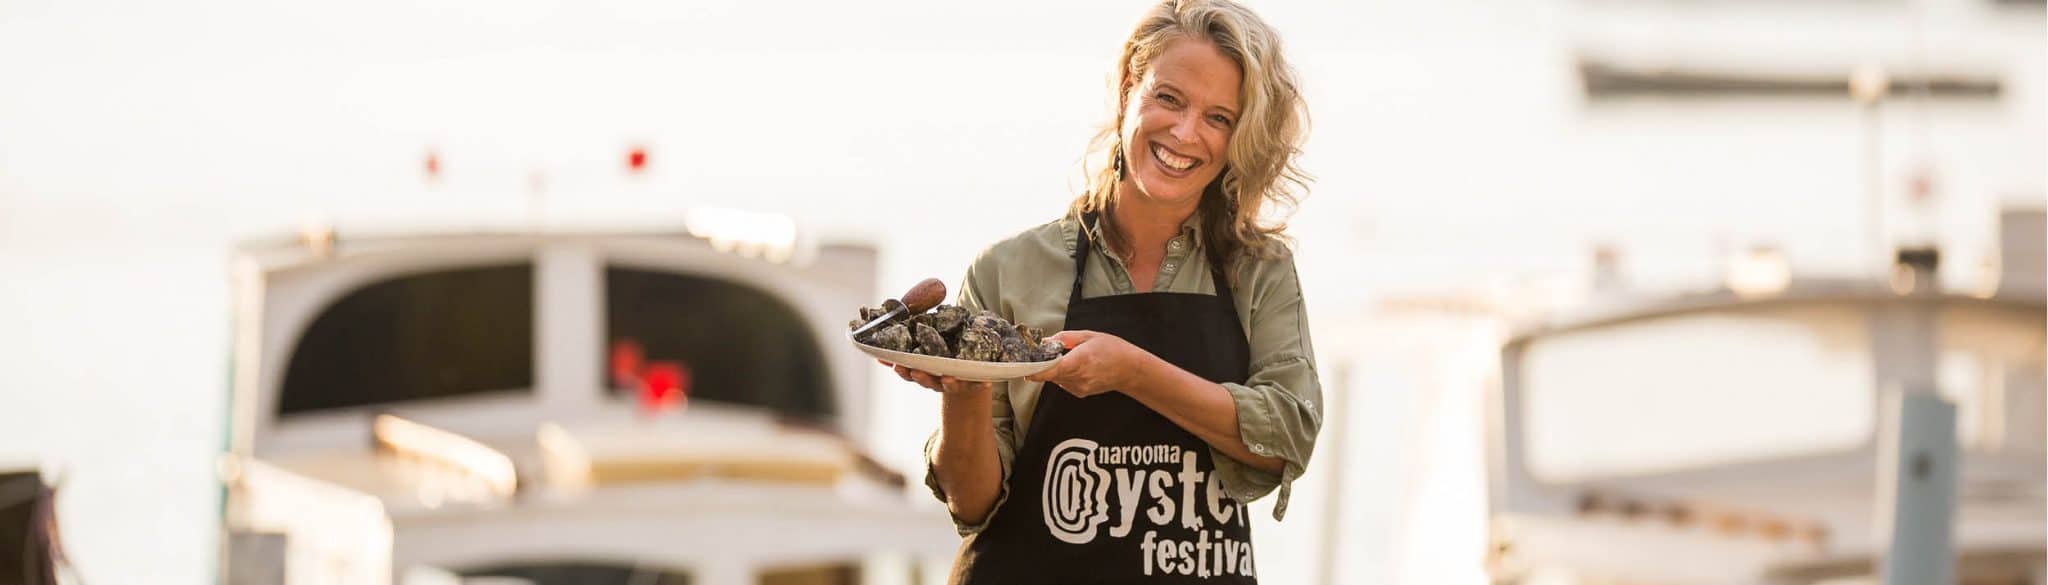 Narooma oyster festival promotional image